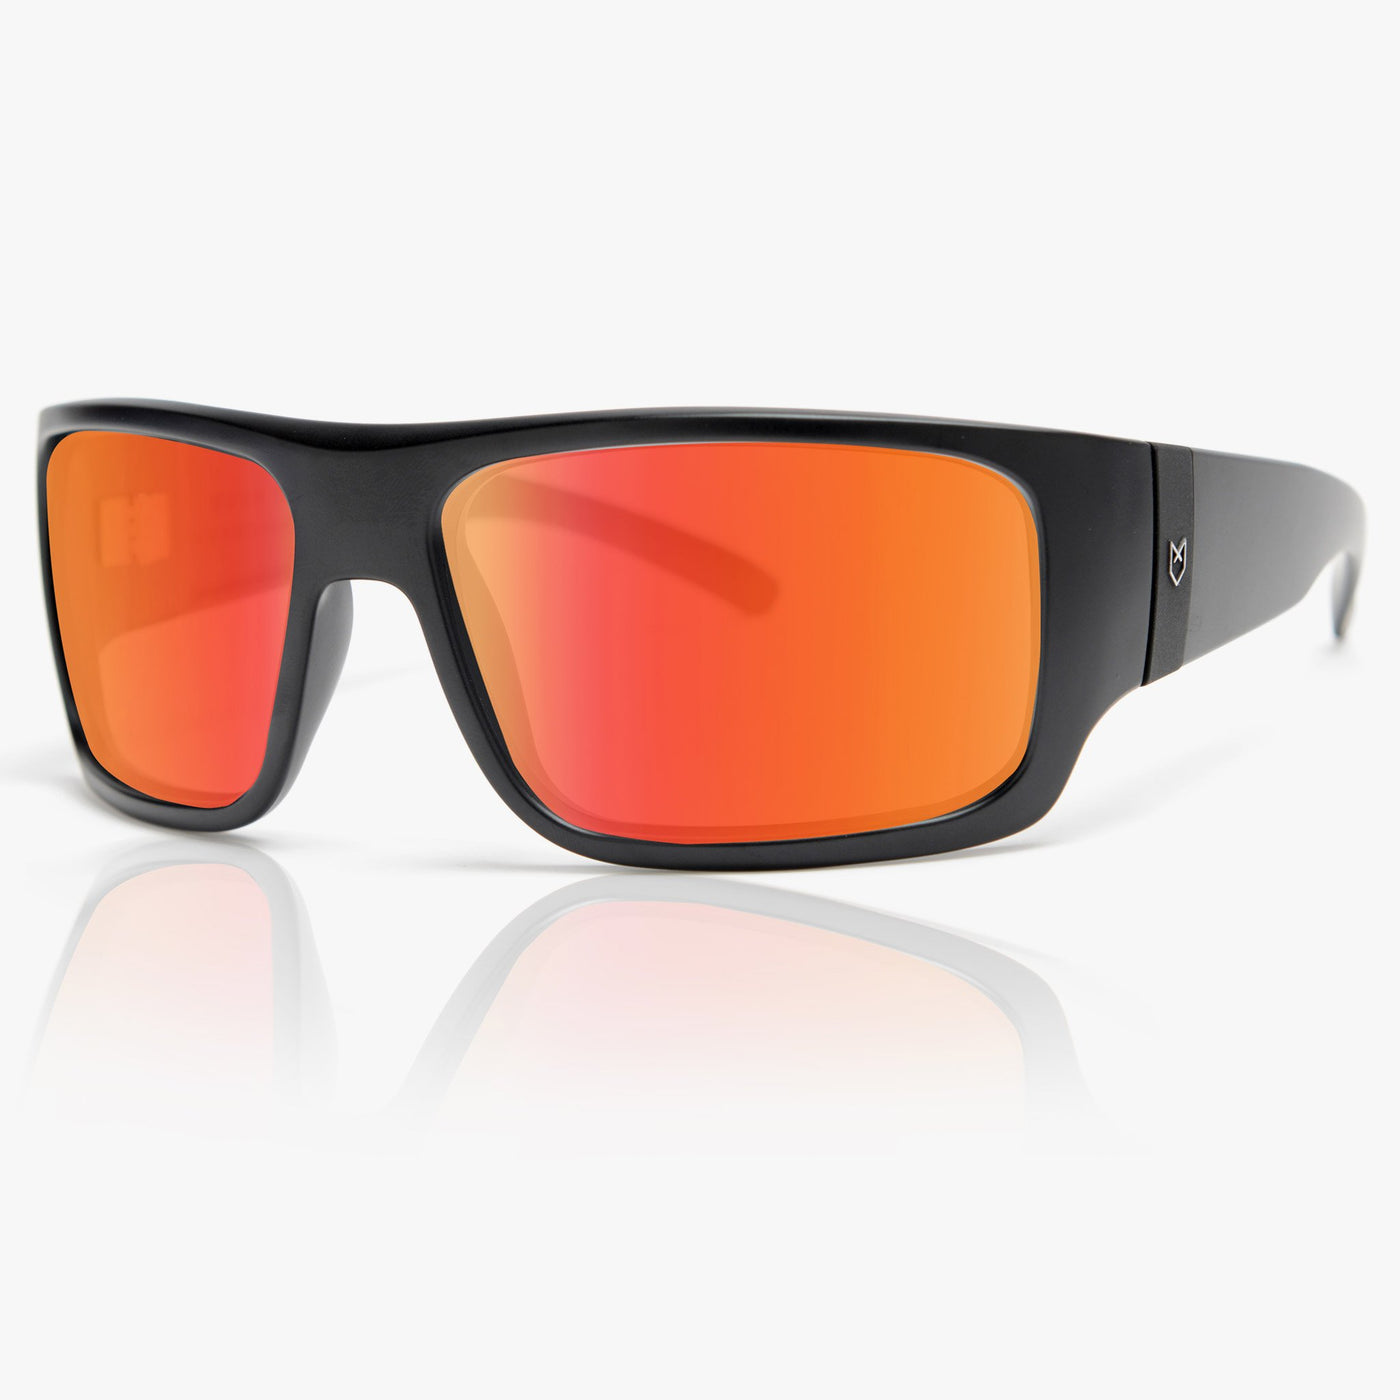 polarized sunglasses for men with big heads